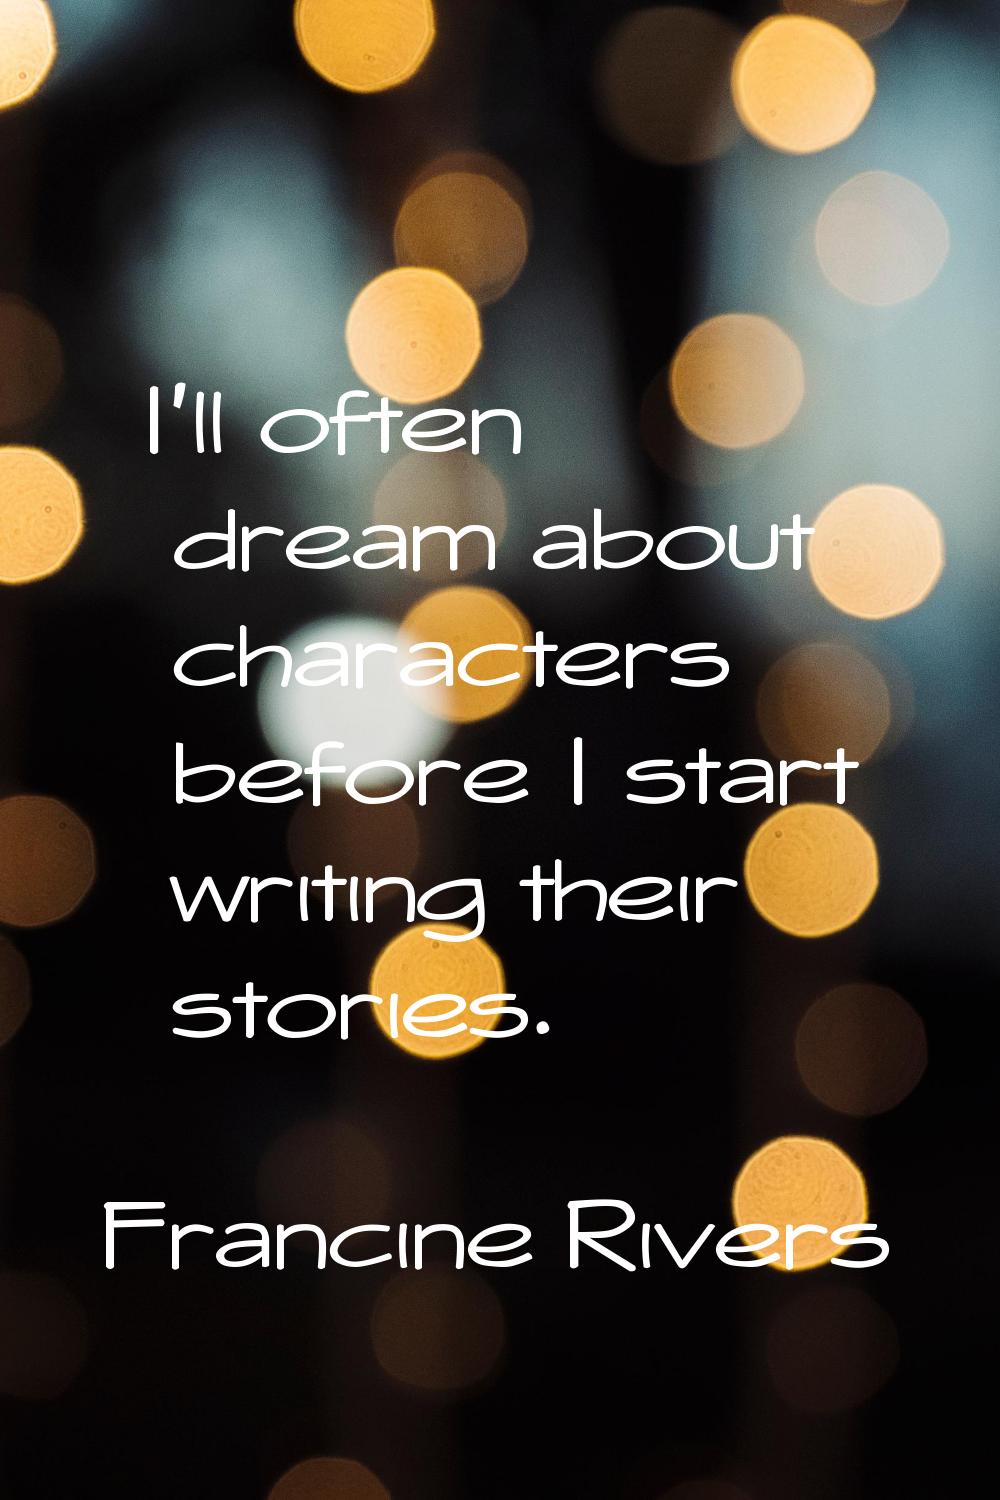 I'll often dream about characters before I start writing their stories.